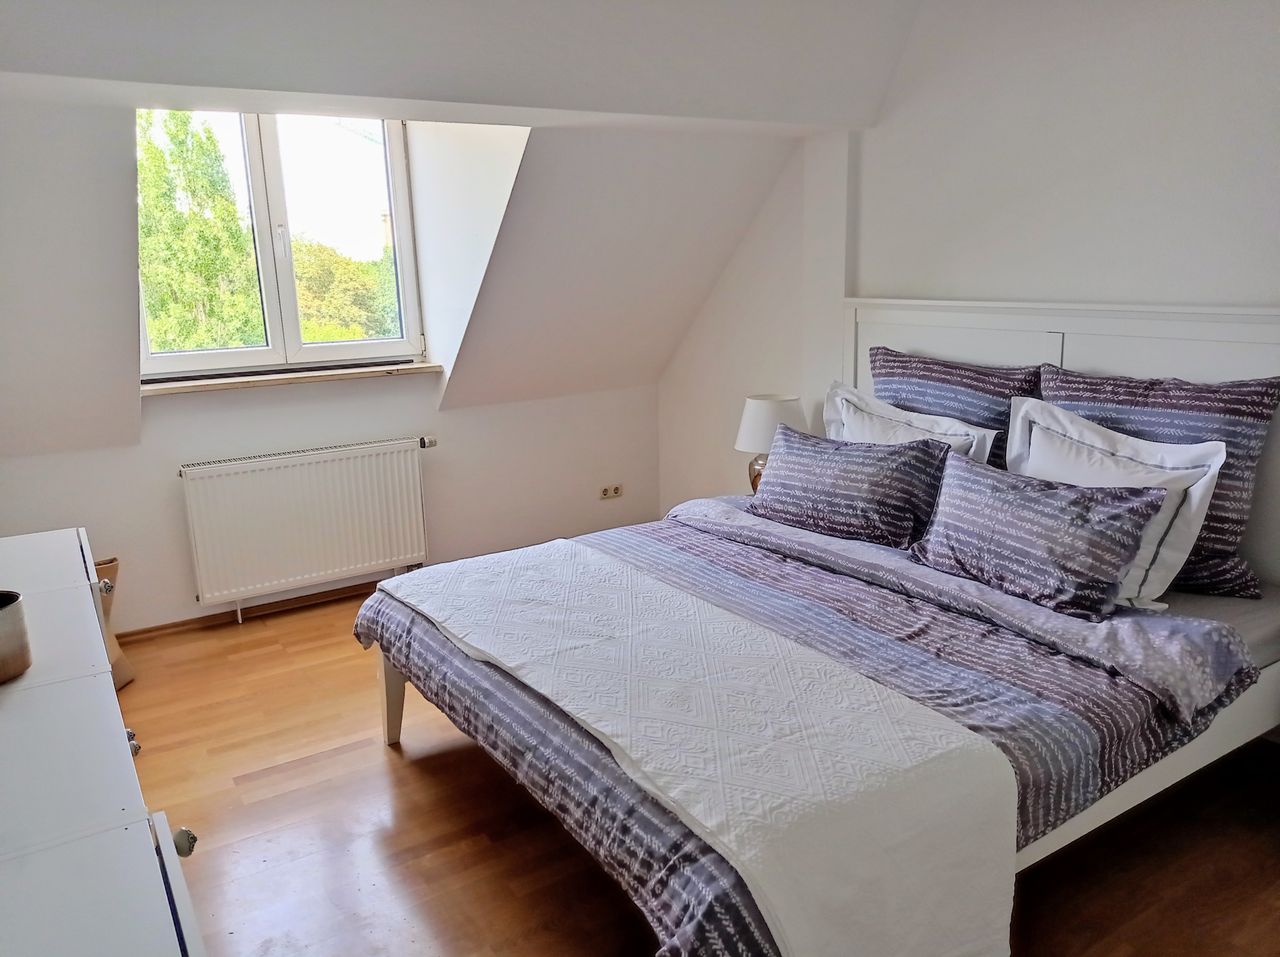 Top location! Bright 3 room flat with roof top terrace